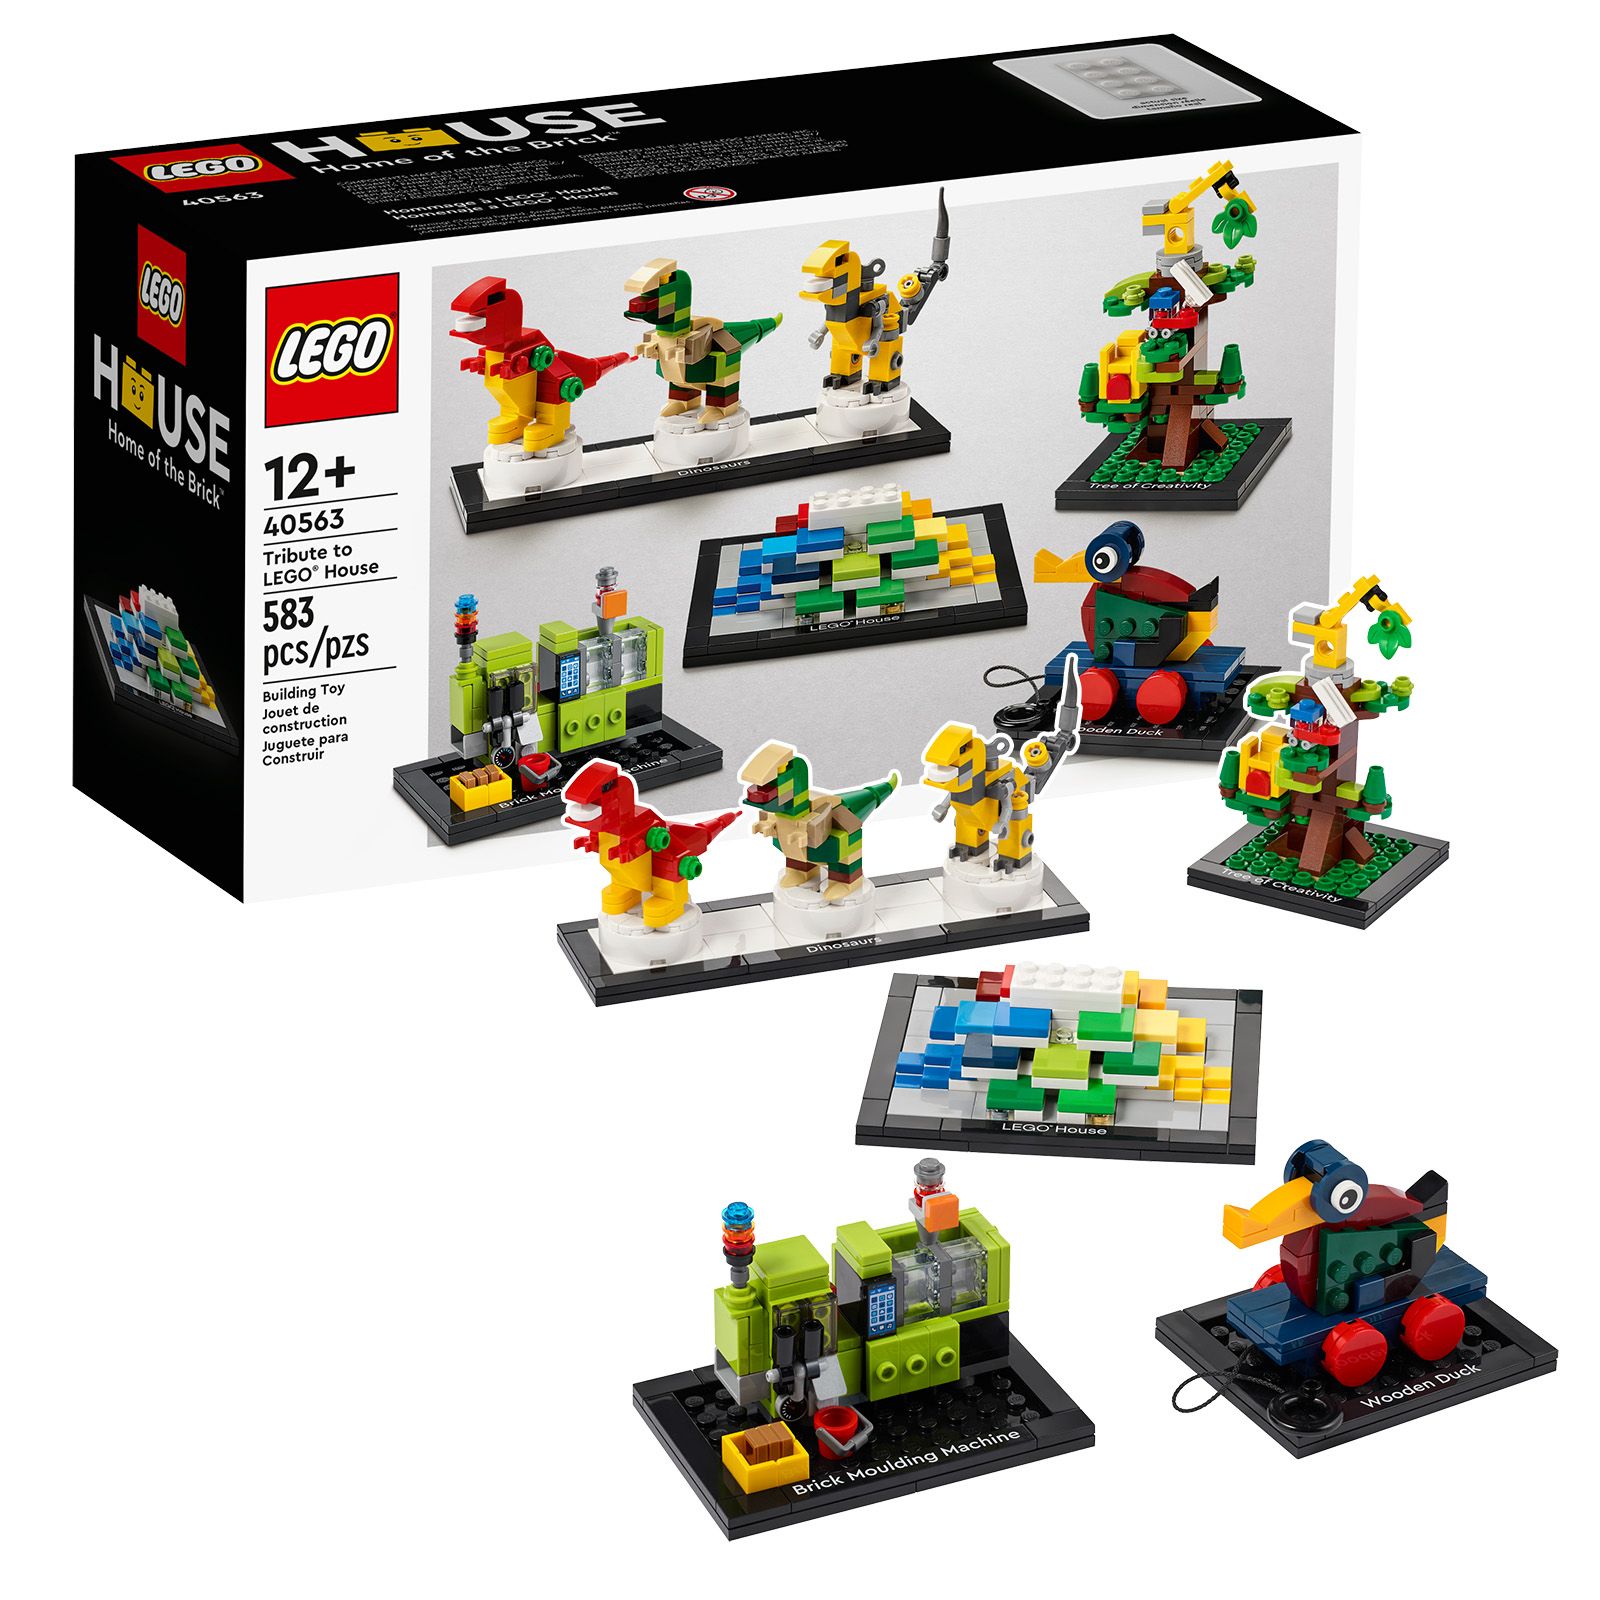 [CÓ HÀNG] LEGO EXCLUSIVE 40563 Tribute to LEGO House